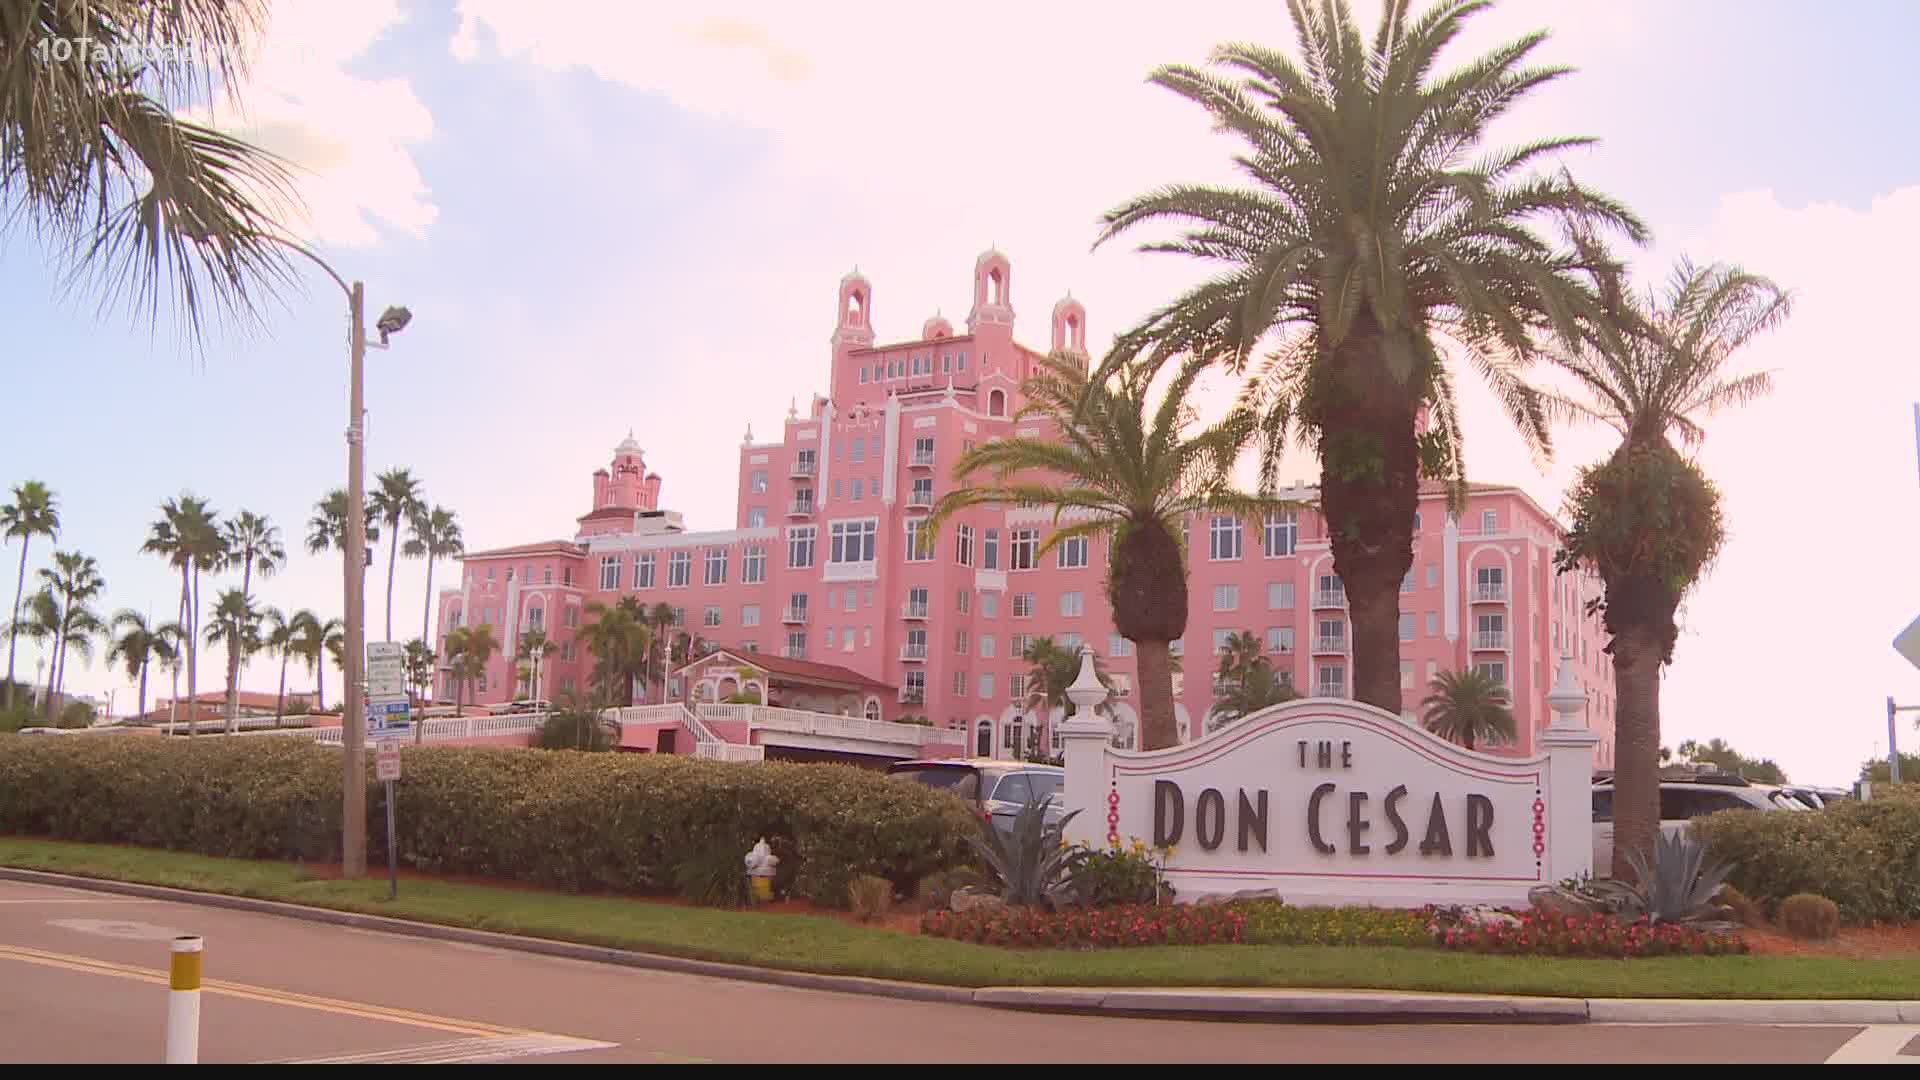 The 'Pink Palace' received a nice award for its architectural design this year. The hotel has been a St. Pete Beach staple since 1928.